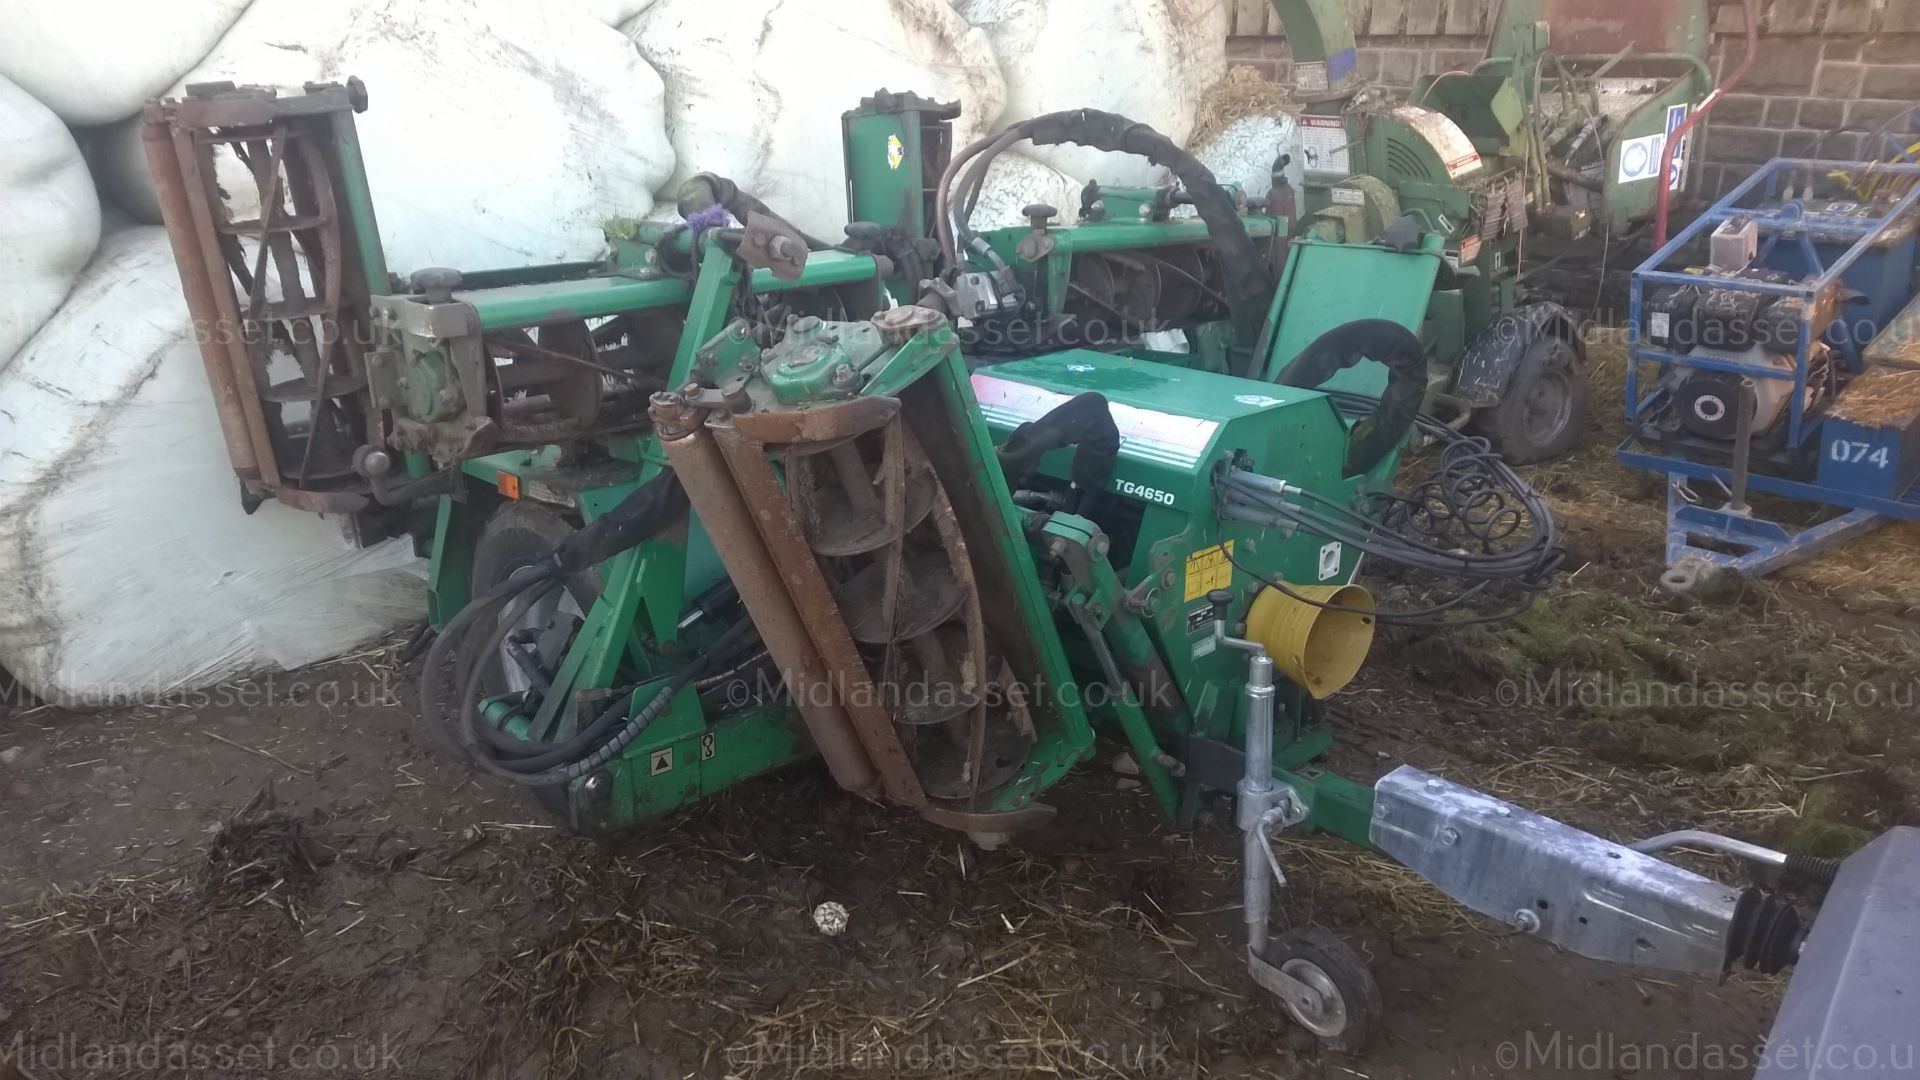 DS - RANSOMES TEXTRON TG 4650 GANG MOWER   EX COUNCIL GOOD WORKING ORDER COLLECTION FROM